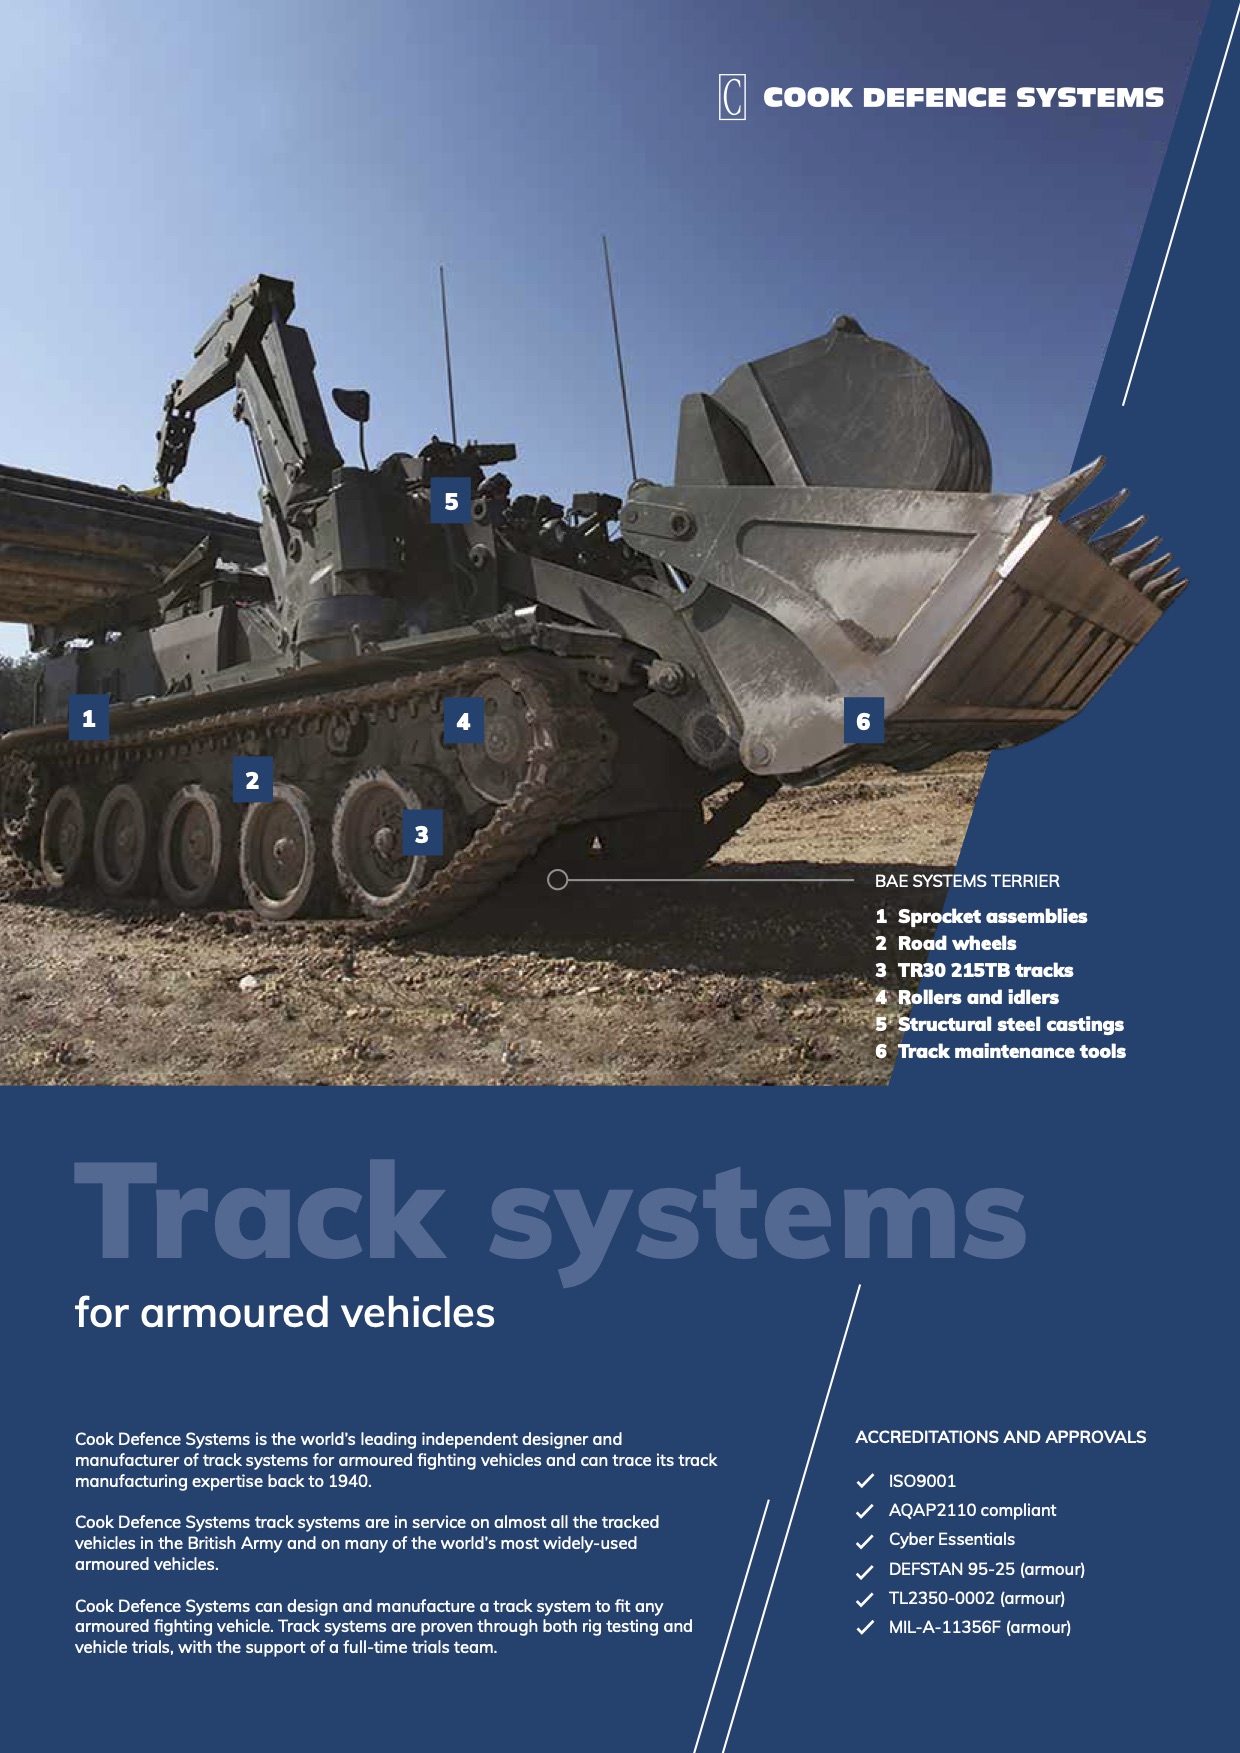 Track systems for armoured vehicles